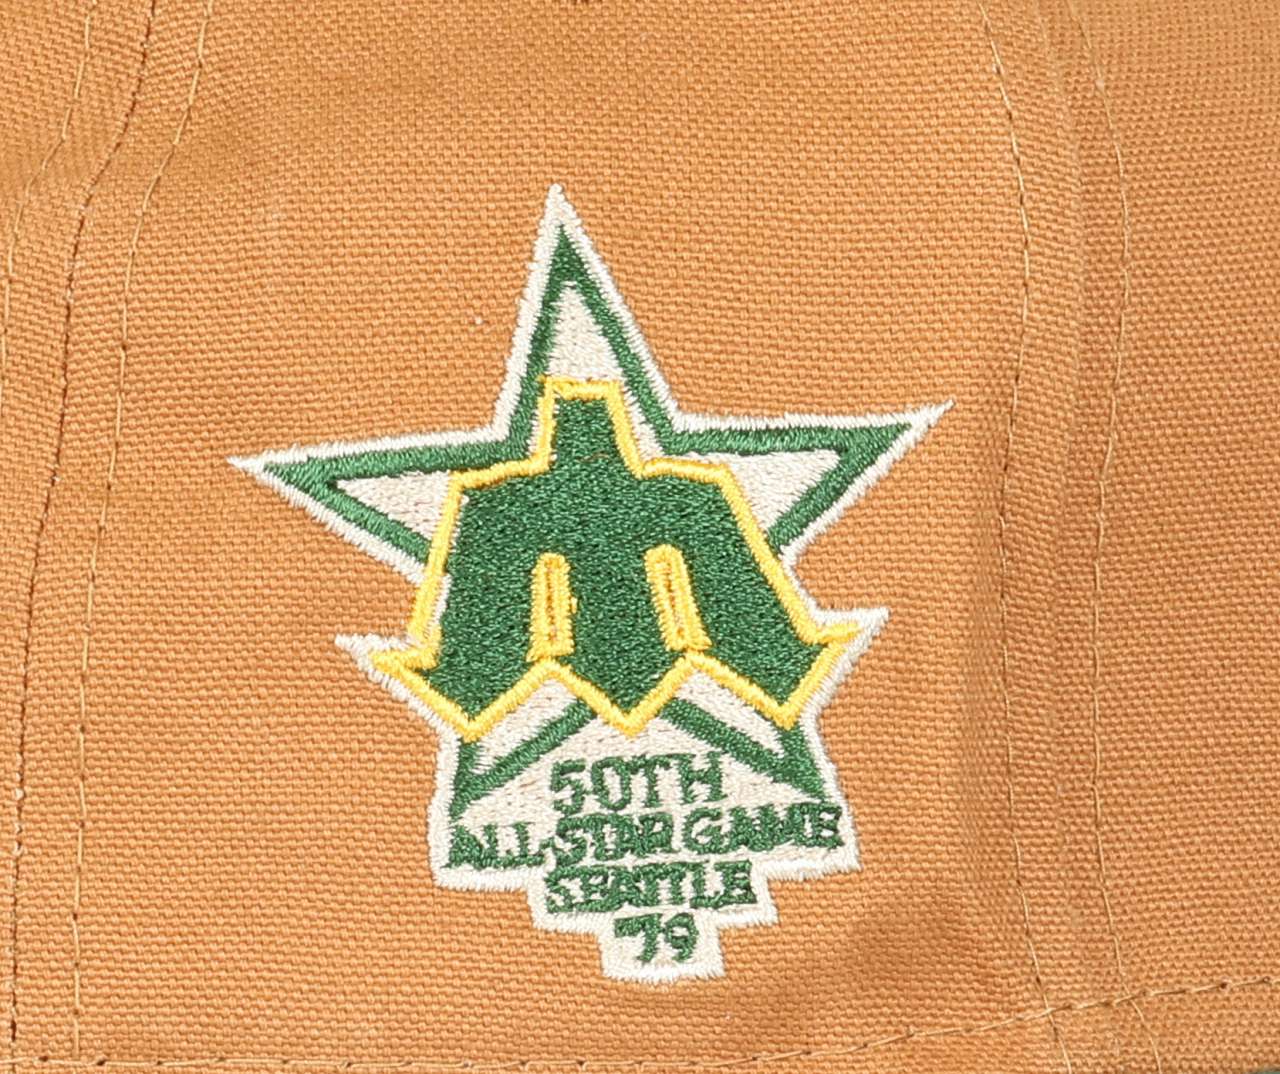 Seattle Mariners  MLB Cooperstown 50th All-Star Game Sidepatch Two Tone Light Bronze Green 59Fifty Basecap New Era